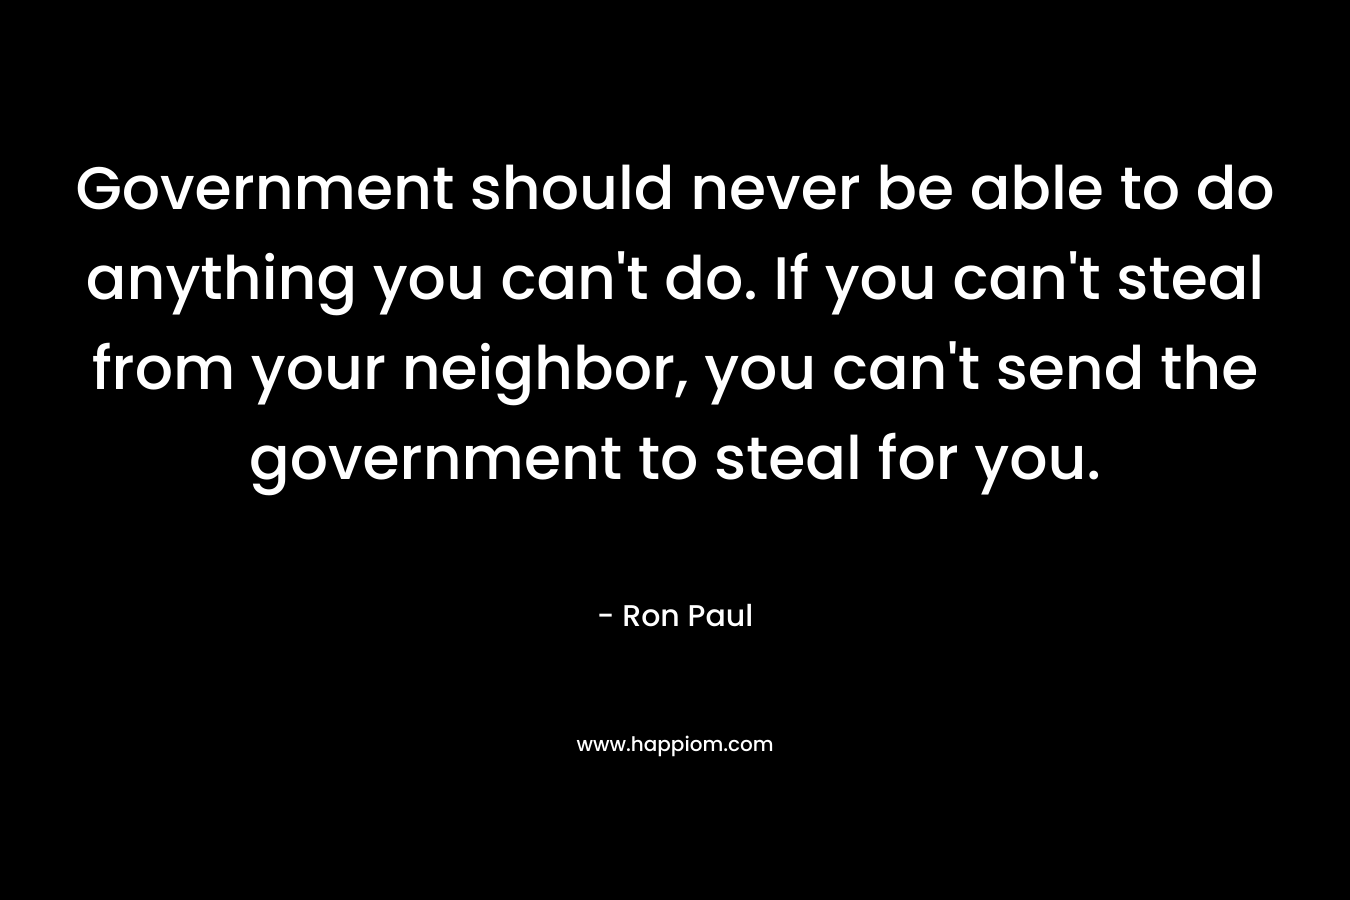 Government should never be able to do anything you can’t do. If you can’t steal from your neighbor, you can’t send the government to steal for you. – Ron Paul